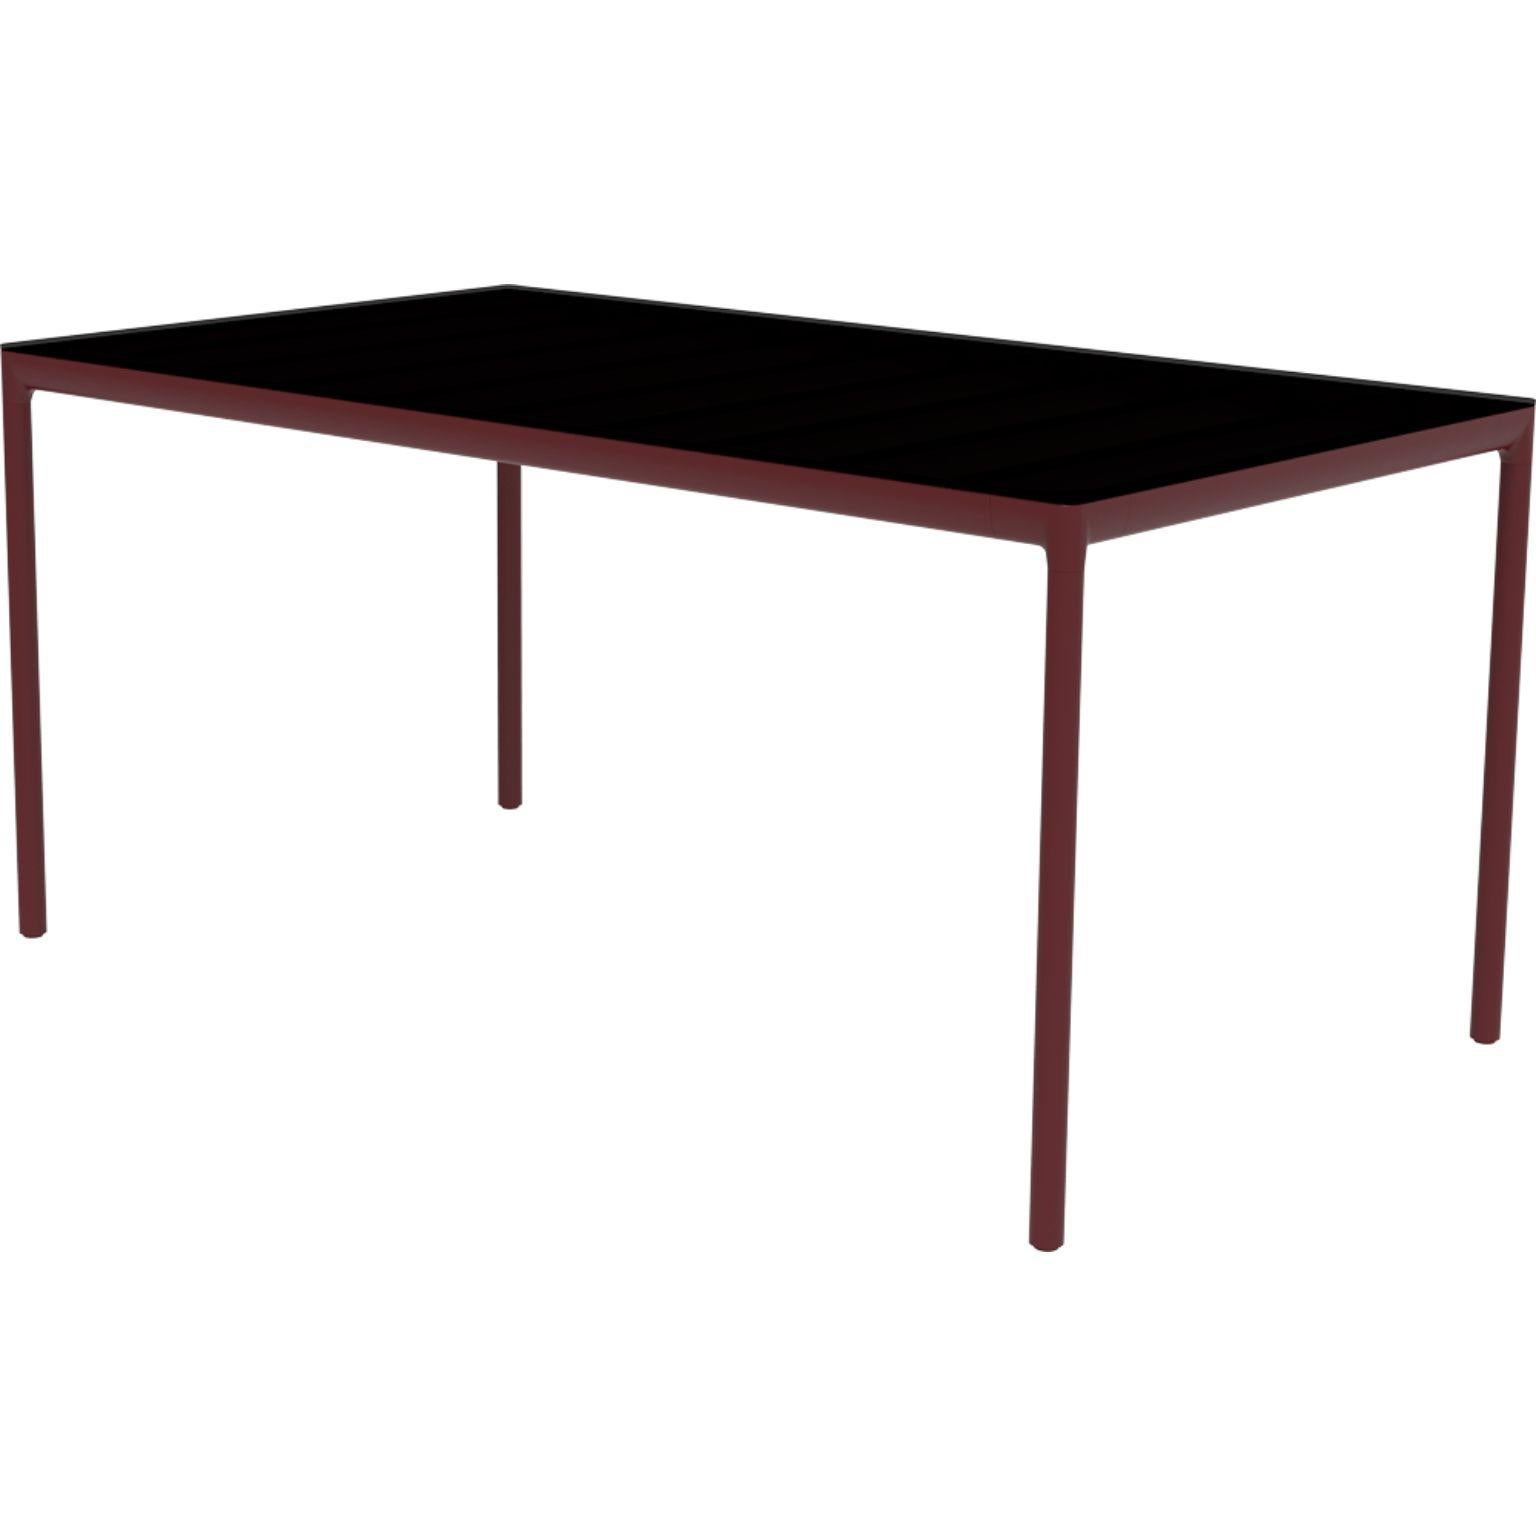 Ribbons Burgundy 160 Coffee Table by MOWEE.
Dimensions: D90 x W160 x H75 cm
Material: Aluminum and HPL top.
Weight: 21 kg.
Also available in different colors and finishes. (HPL Black Edge or Neolith top).

An unmistakable collection for its